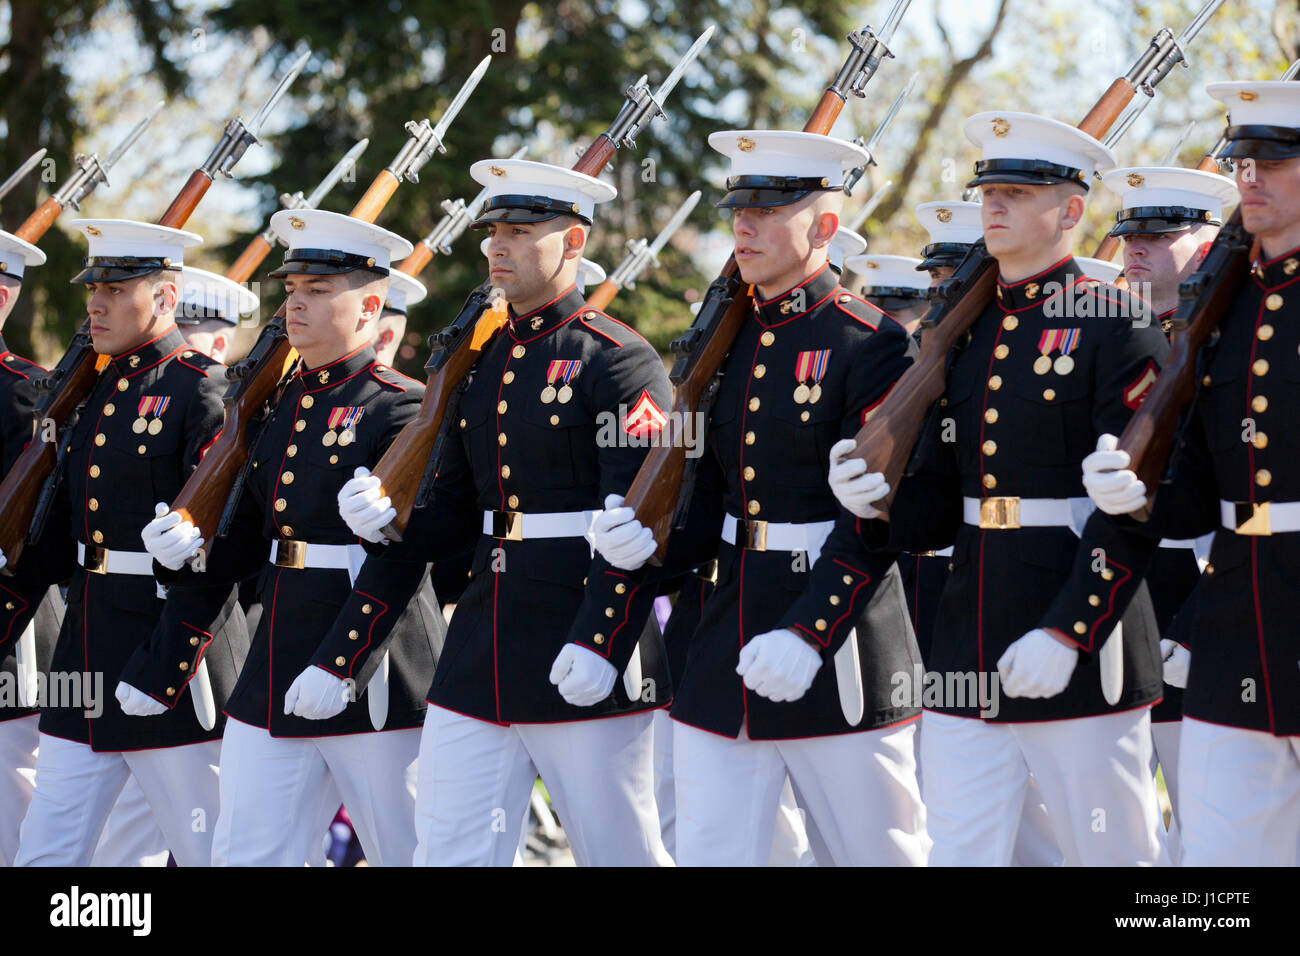 US Marine Corps Honor Guard marching during parade - USA Stock Photo